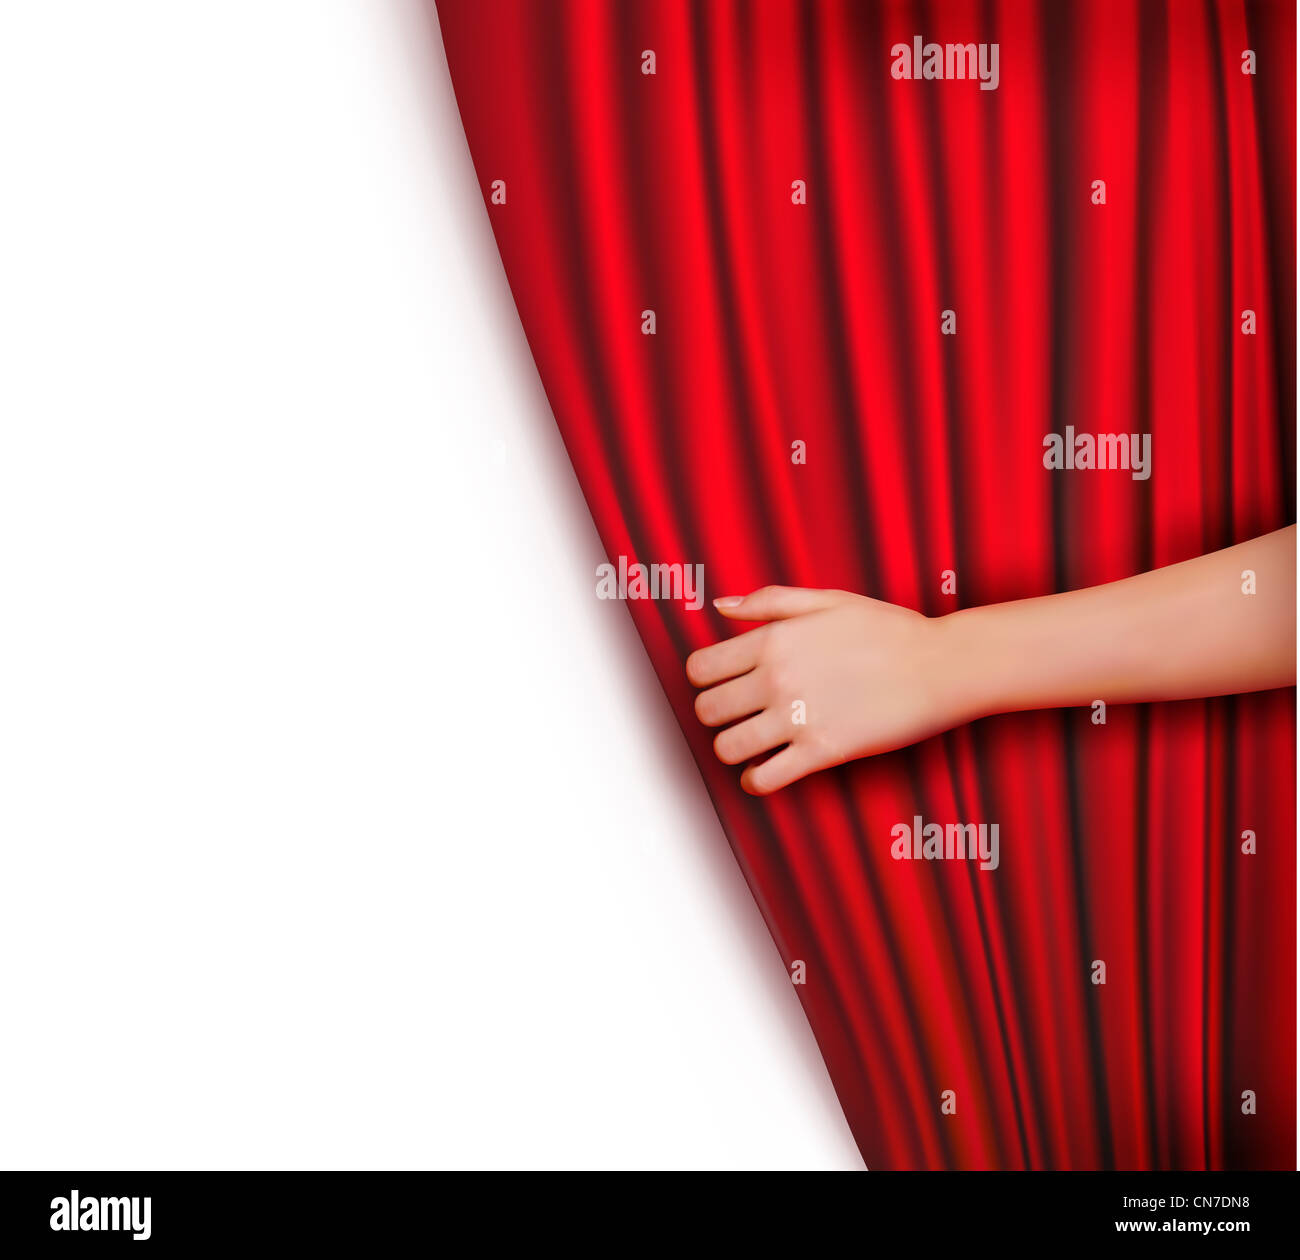 Background with red velvet curtain Stock Photo